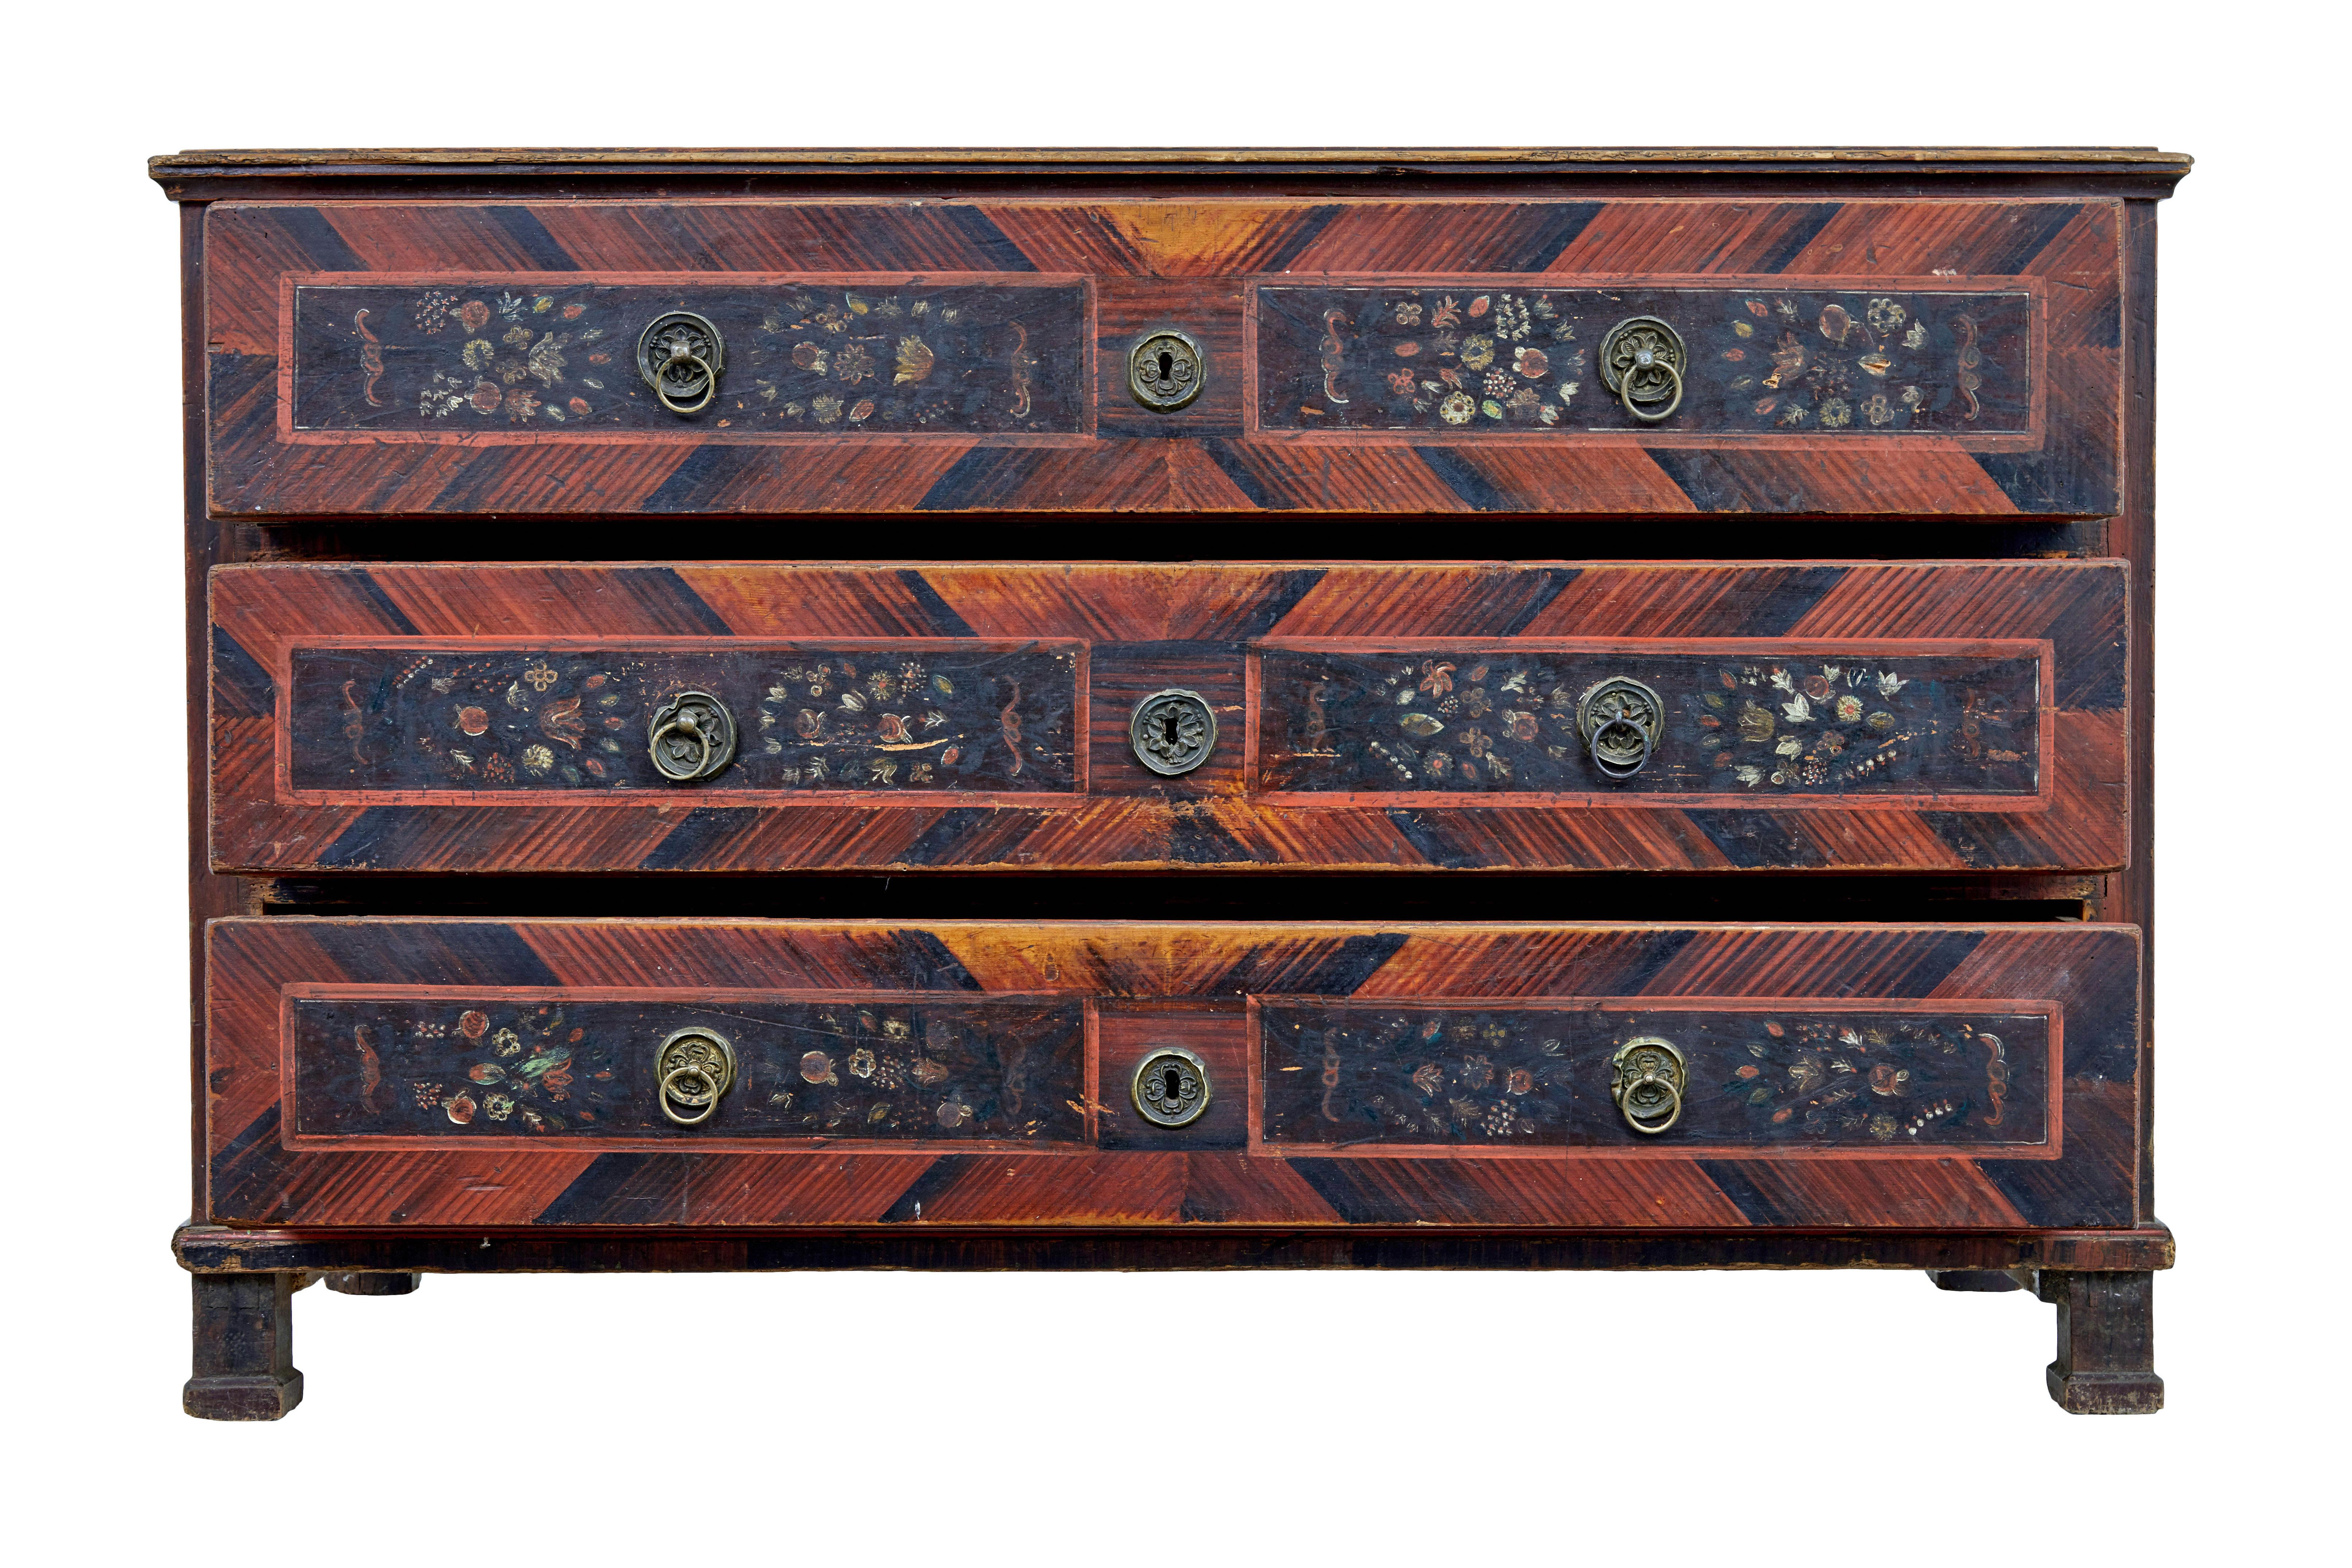 Large hand painted 19th century chest of drawers circa 1820.

Substantial european pine chest of drawers quite possibly from hungary.

Hand painted in a black and red tonal colour scheme, the paint dates from around the time of application which is